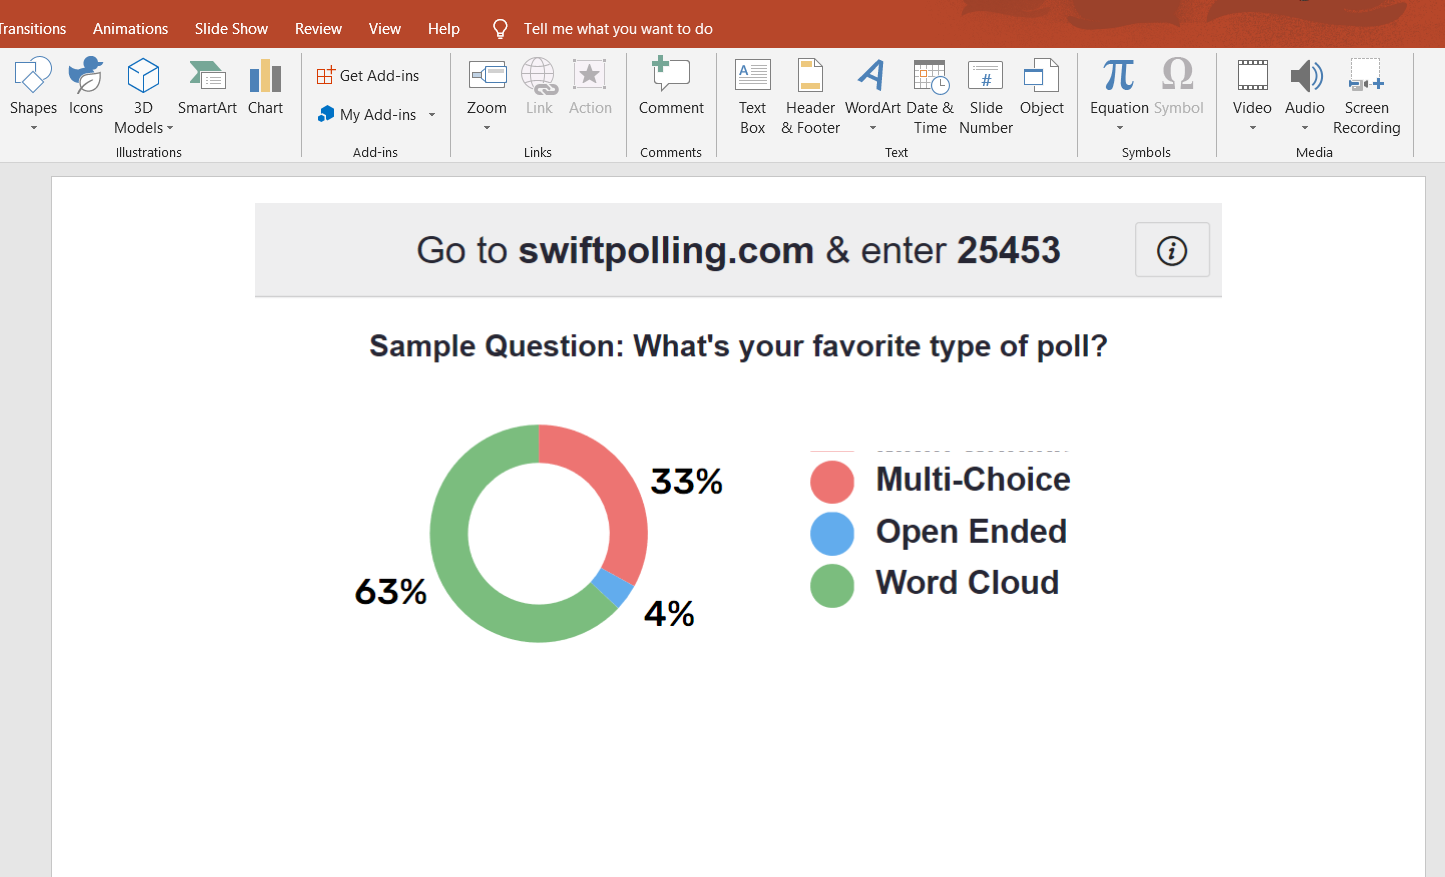 Swift Polling allows you to receive feedback from your audience via SMS.